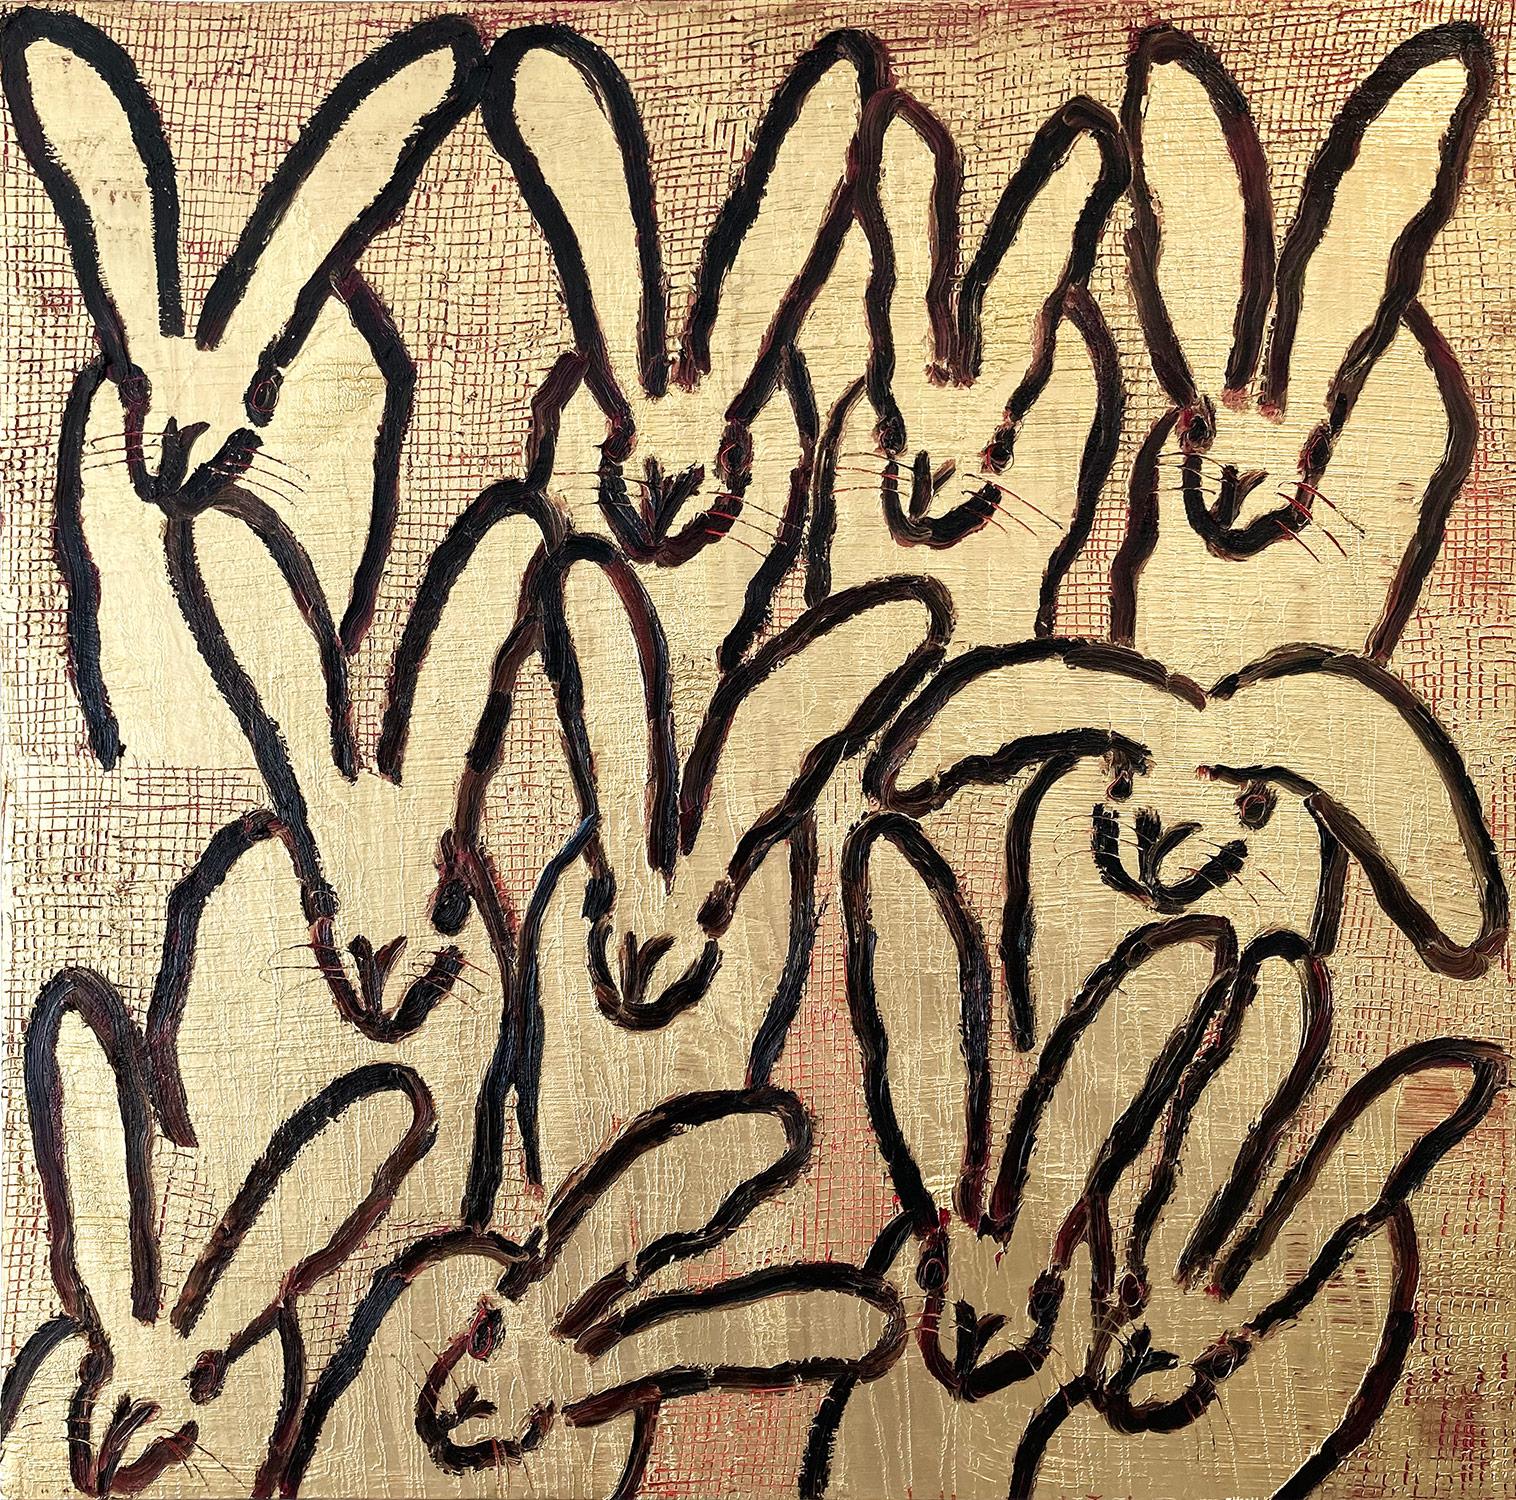 Hunt Slonem Abstract Painting - "Scored Hutch (Golden)" Black Bunnies on Red and Gold Background Oil on Canvas